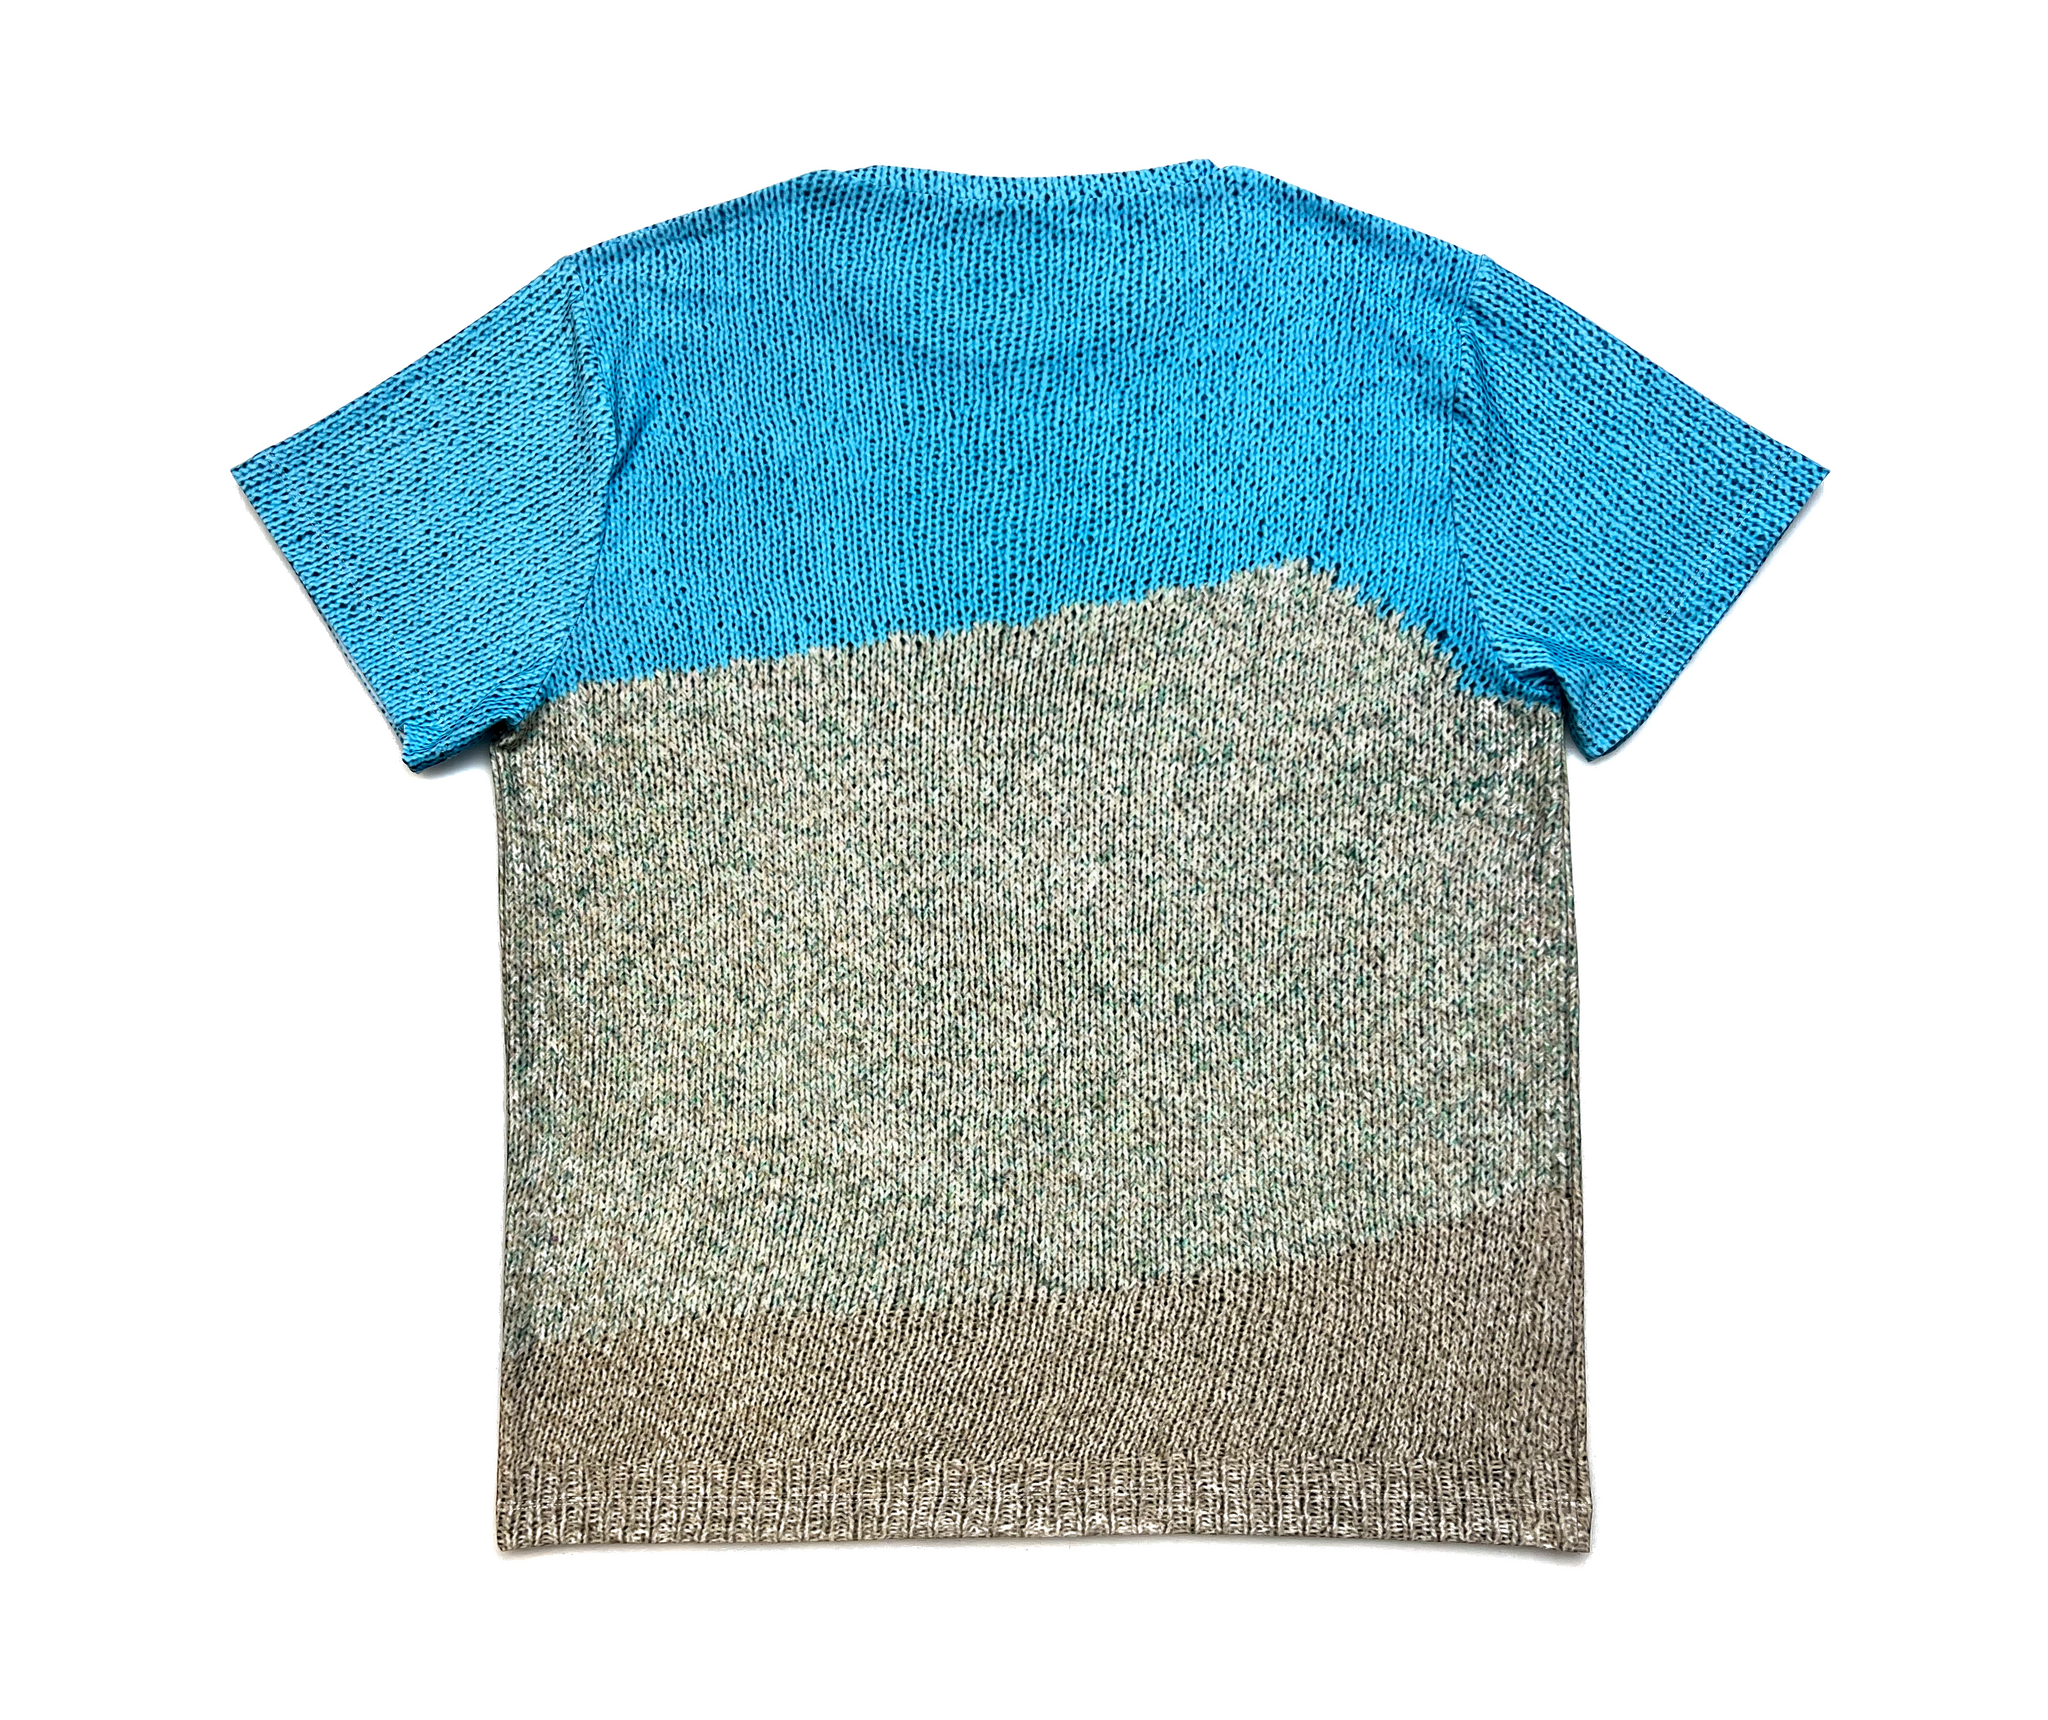 Sweater of Sweaters – Sam Barsky's T-Shirt Store